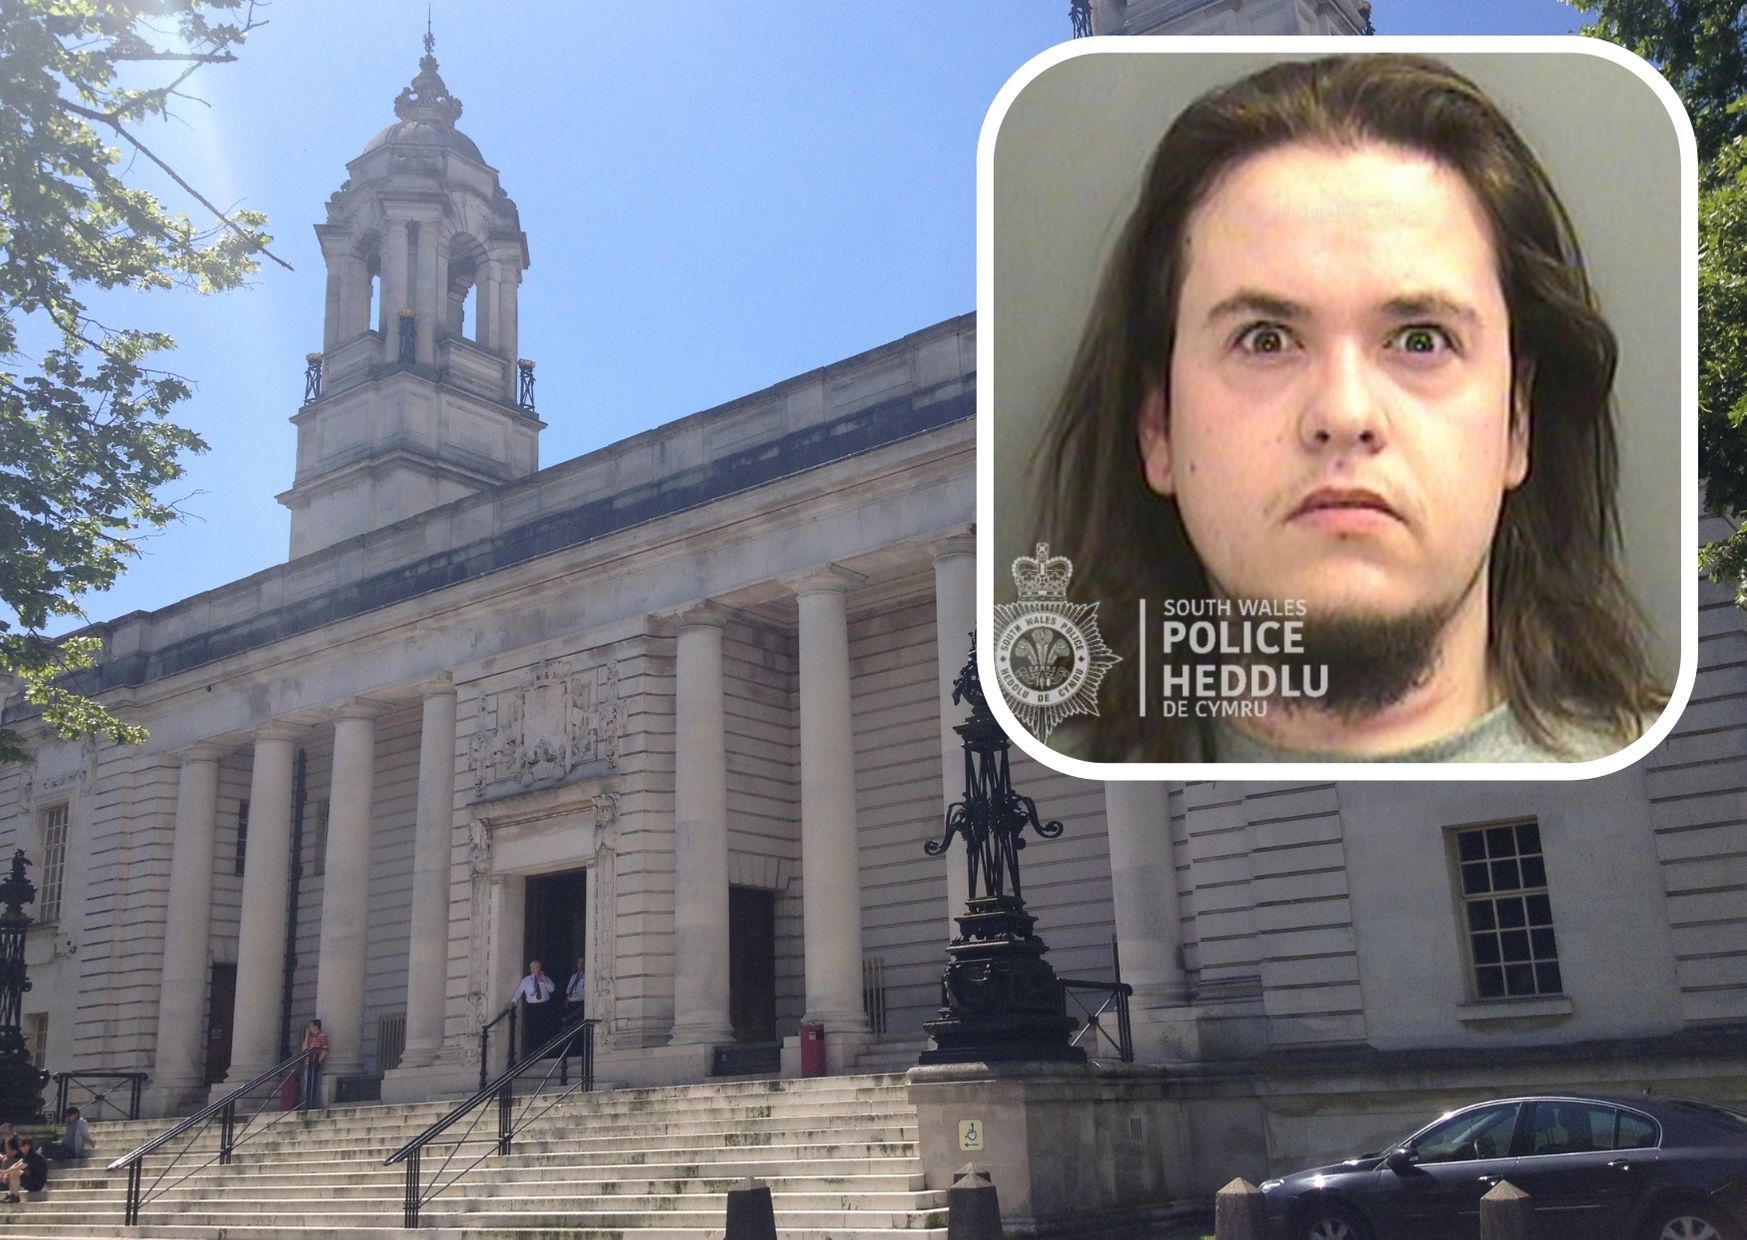 Madog Rowlands was sentenced at Cardiff Crown Court on Friday